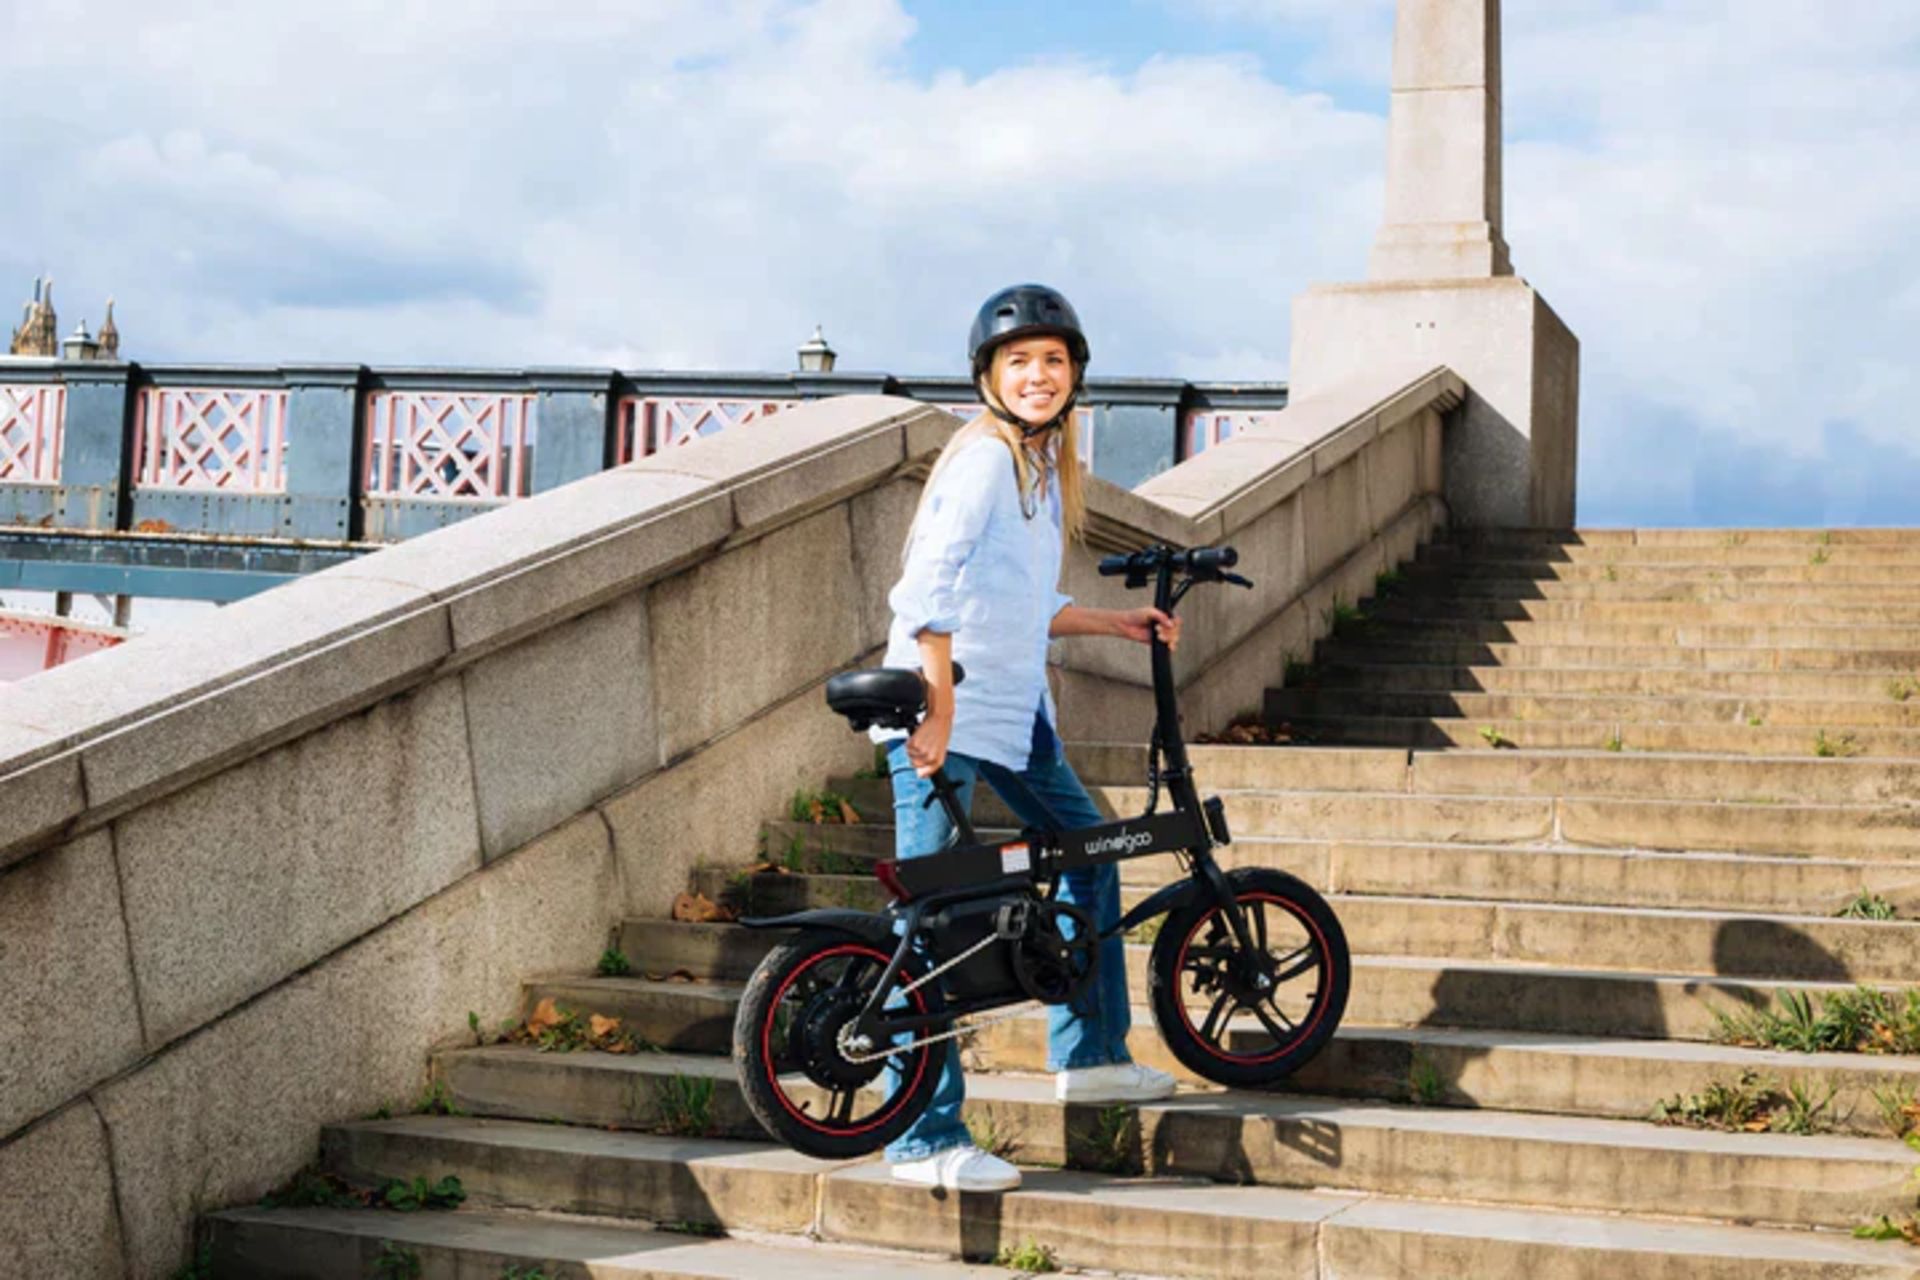 5 X Windgoo B20 Pro Electric Bike. RRP £1,100.99. With 16-inch-wide tires and a frame of upgraded - Bild 5 aus 7